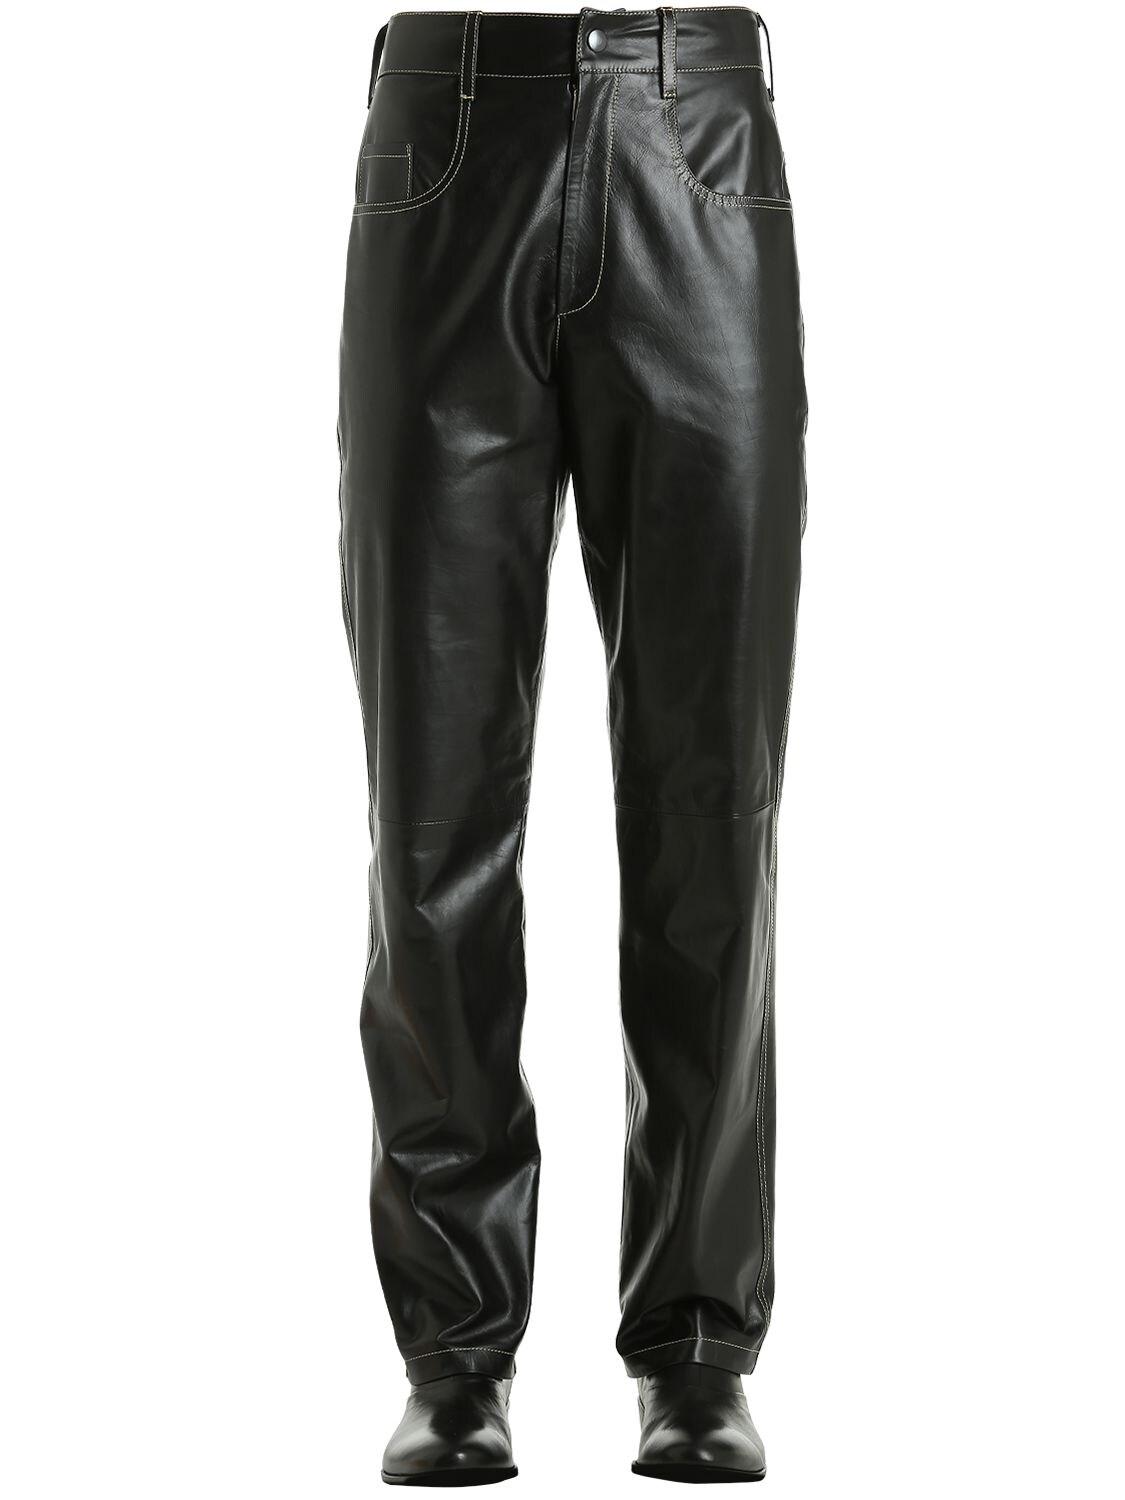 Vejas Leather Pants W/ Contrasting Stitching in Black for Men - Lyst